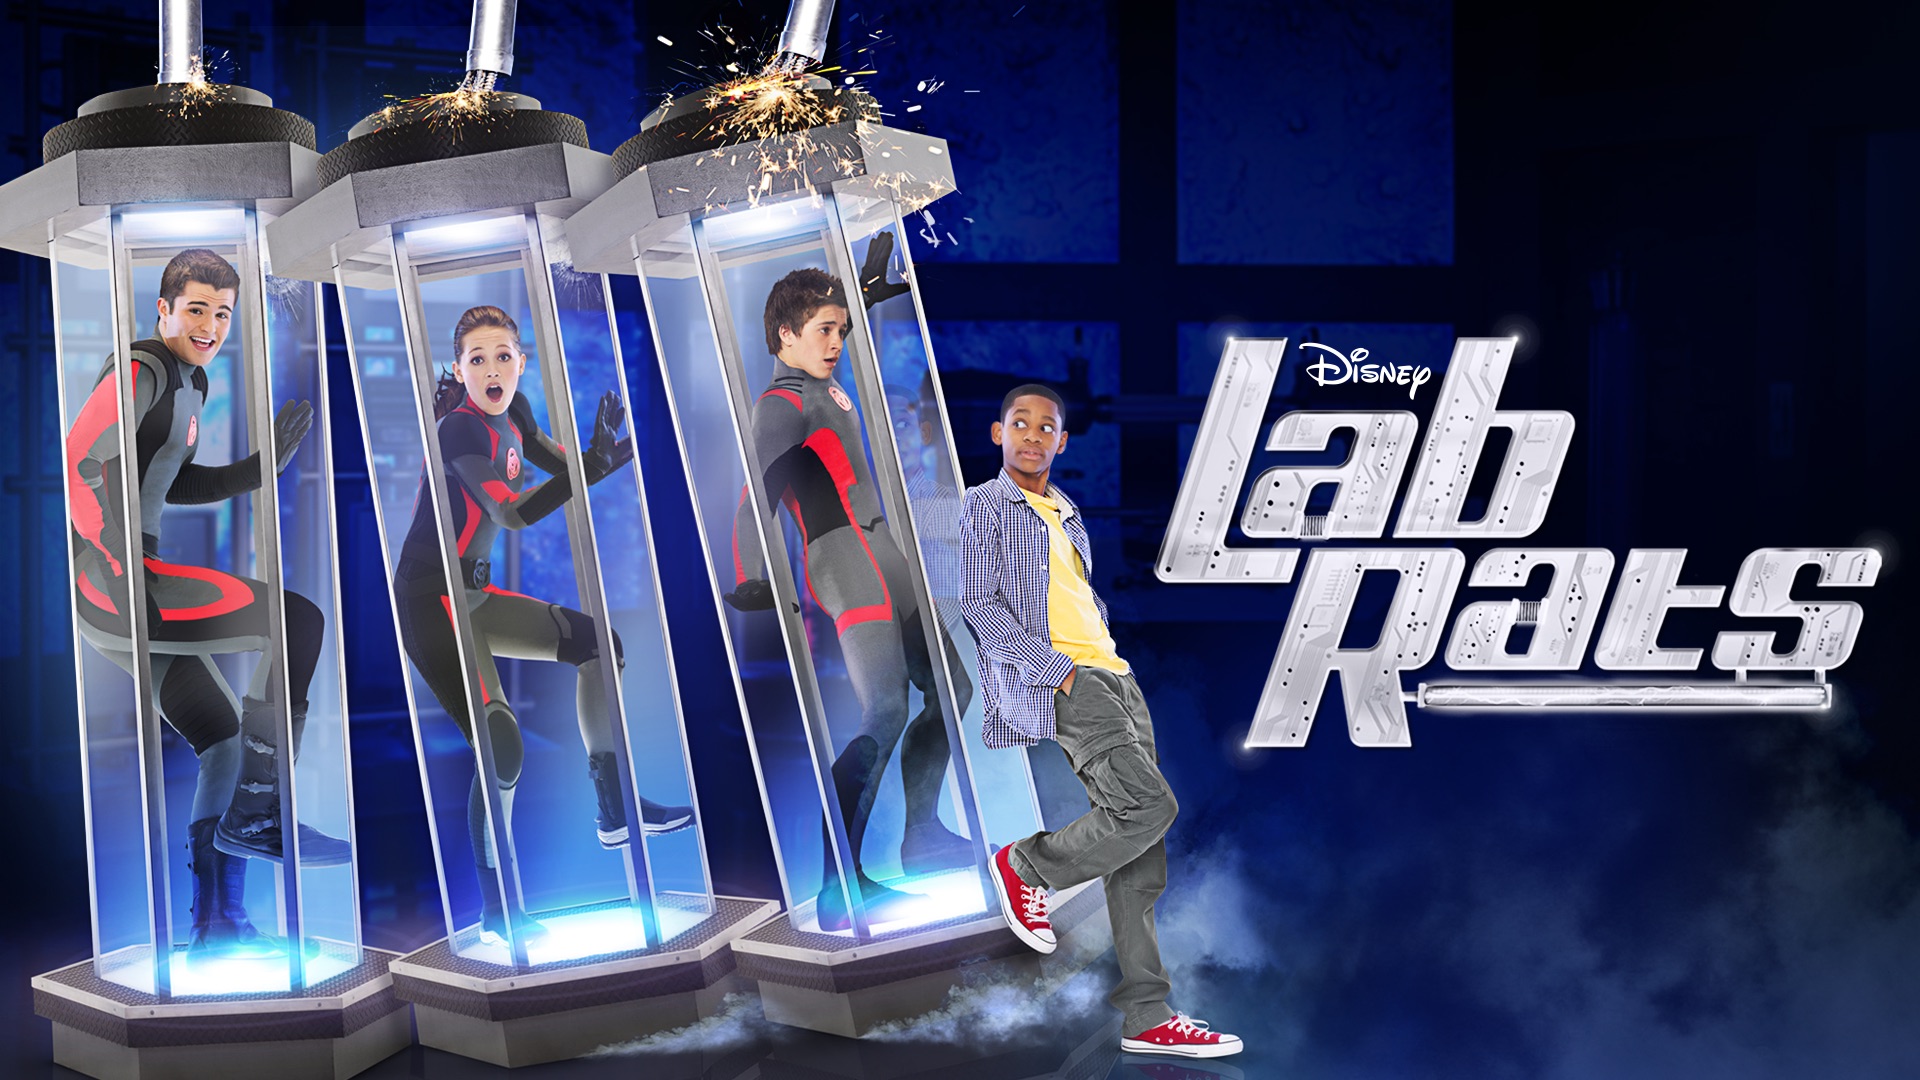 the lab rats download